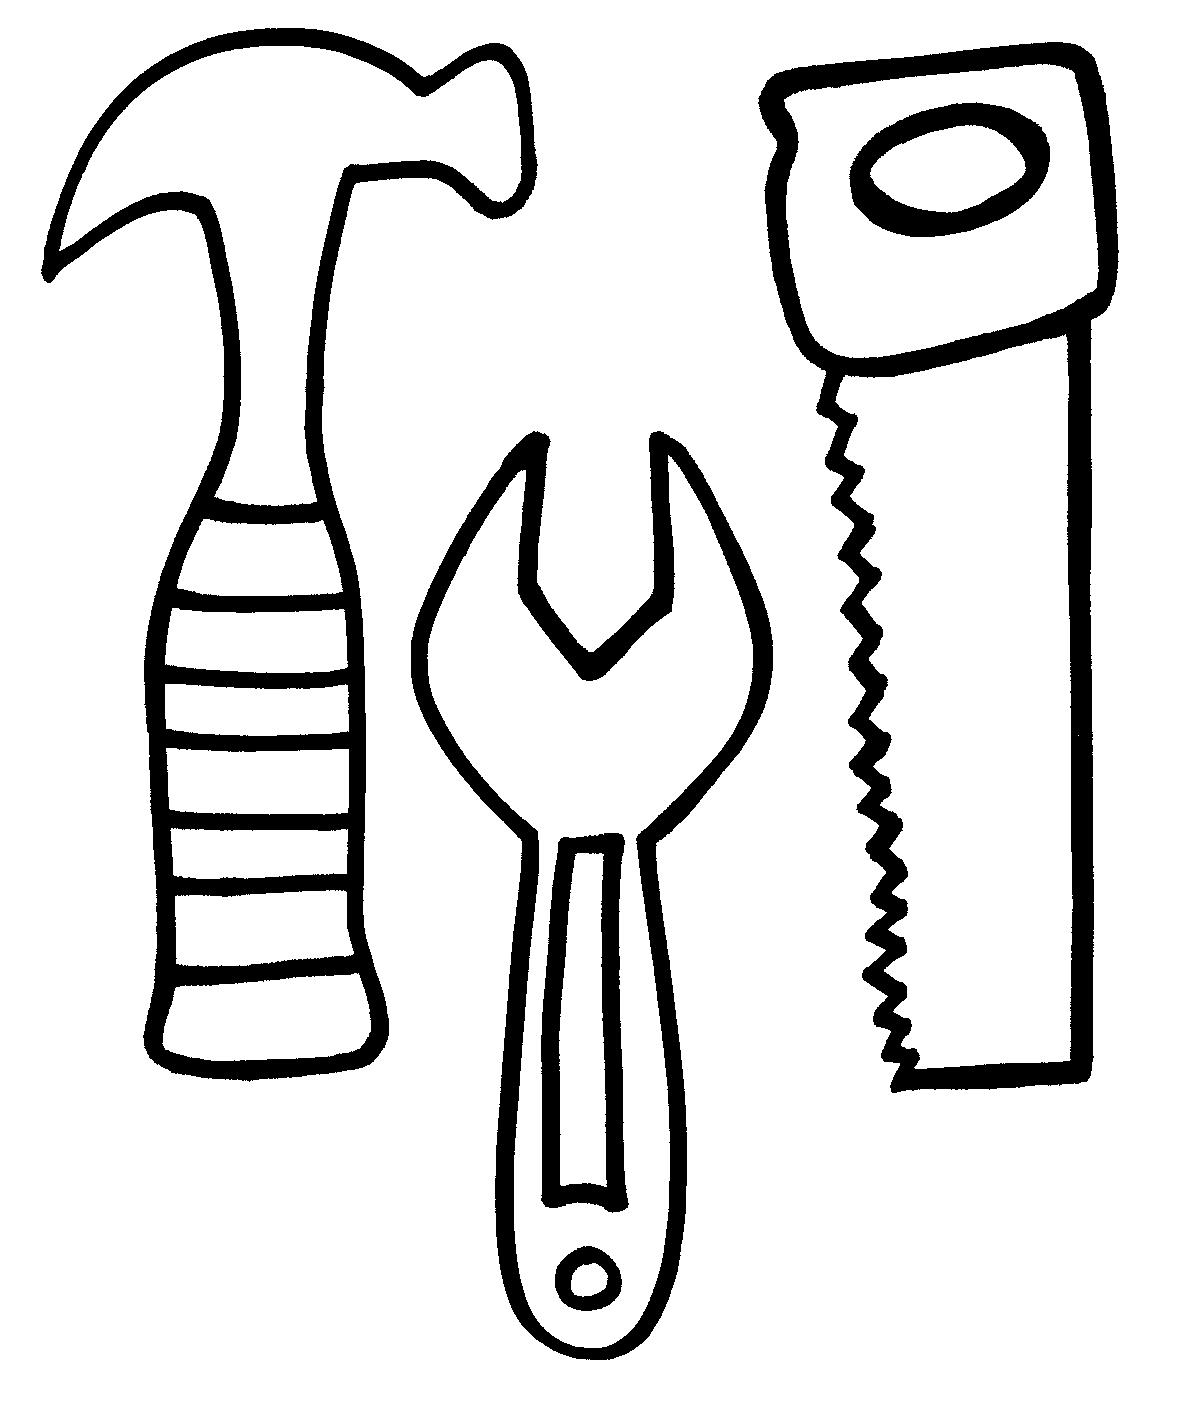 Construction Tools Coloring Pages | Free download on ClipArtMag